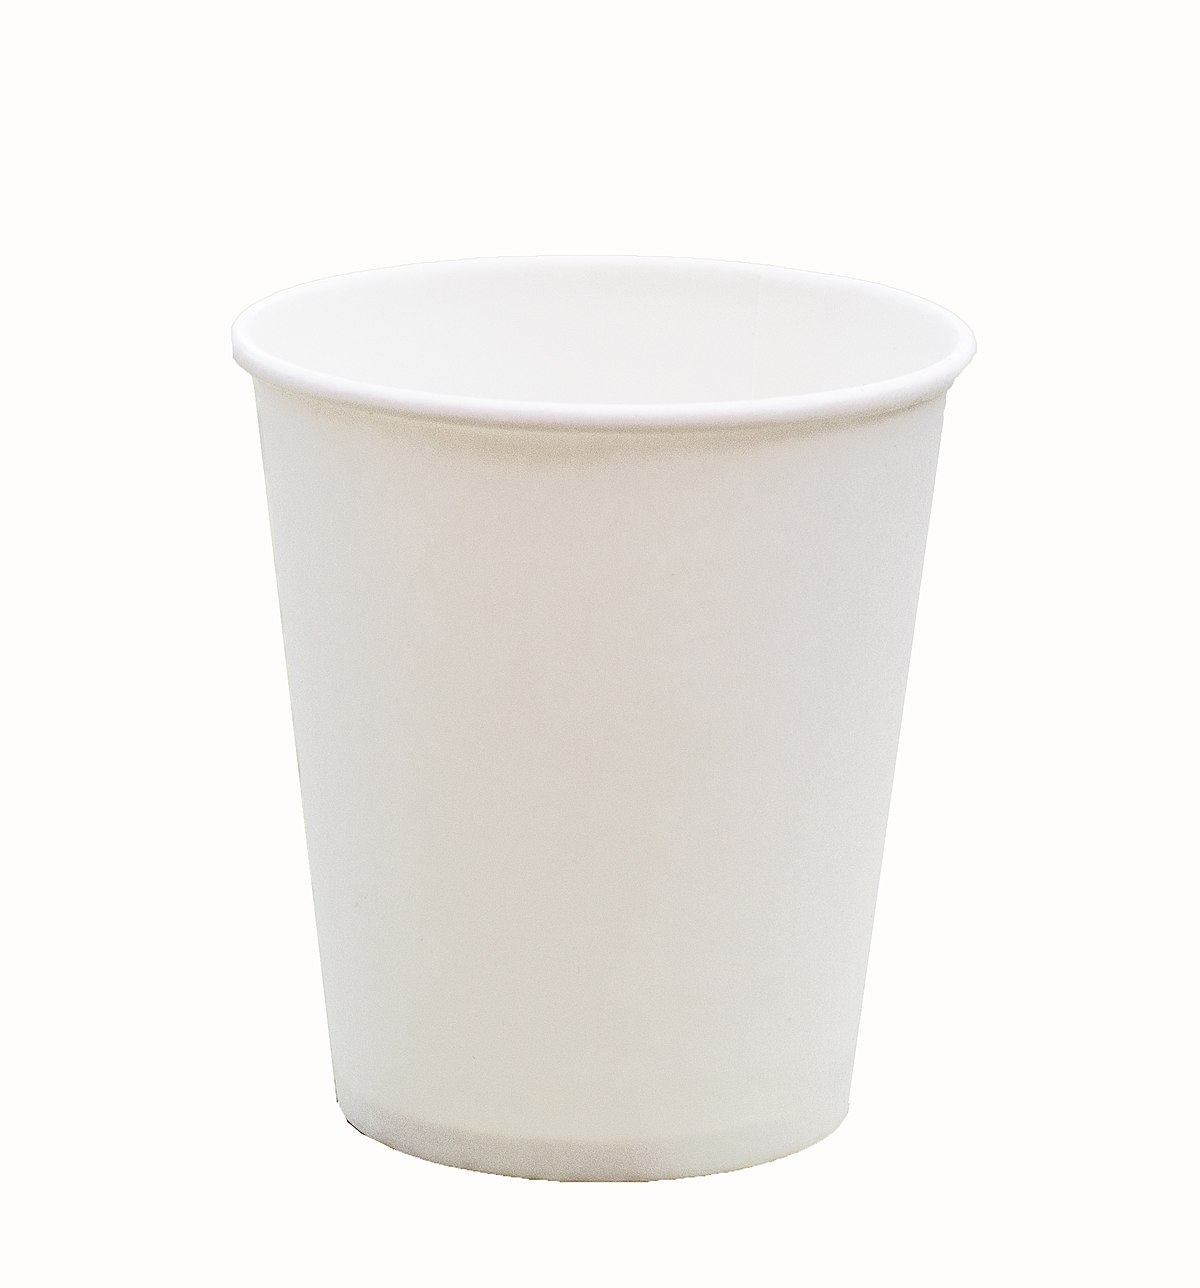 https://upload.wikimedia.org/wikipedia/commons/thumb/c/c2/Paper_cup_DS.jpg/1200px-Paper_cup_DS.jpg